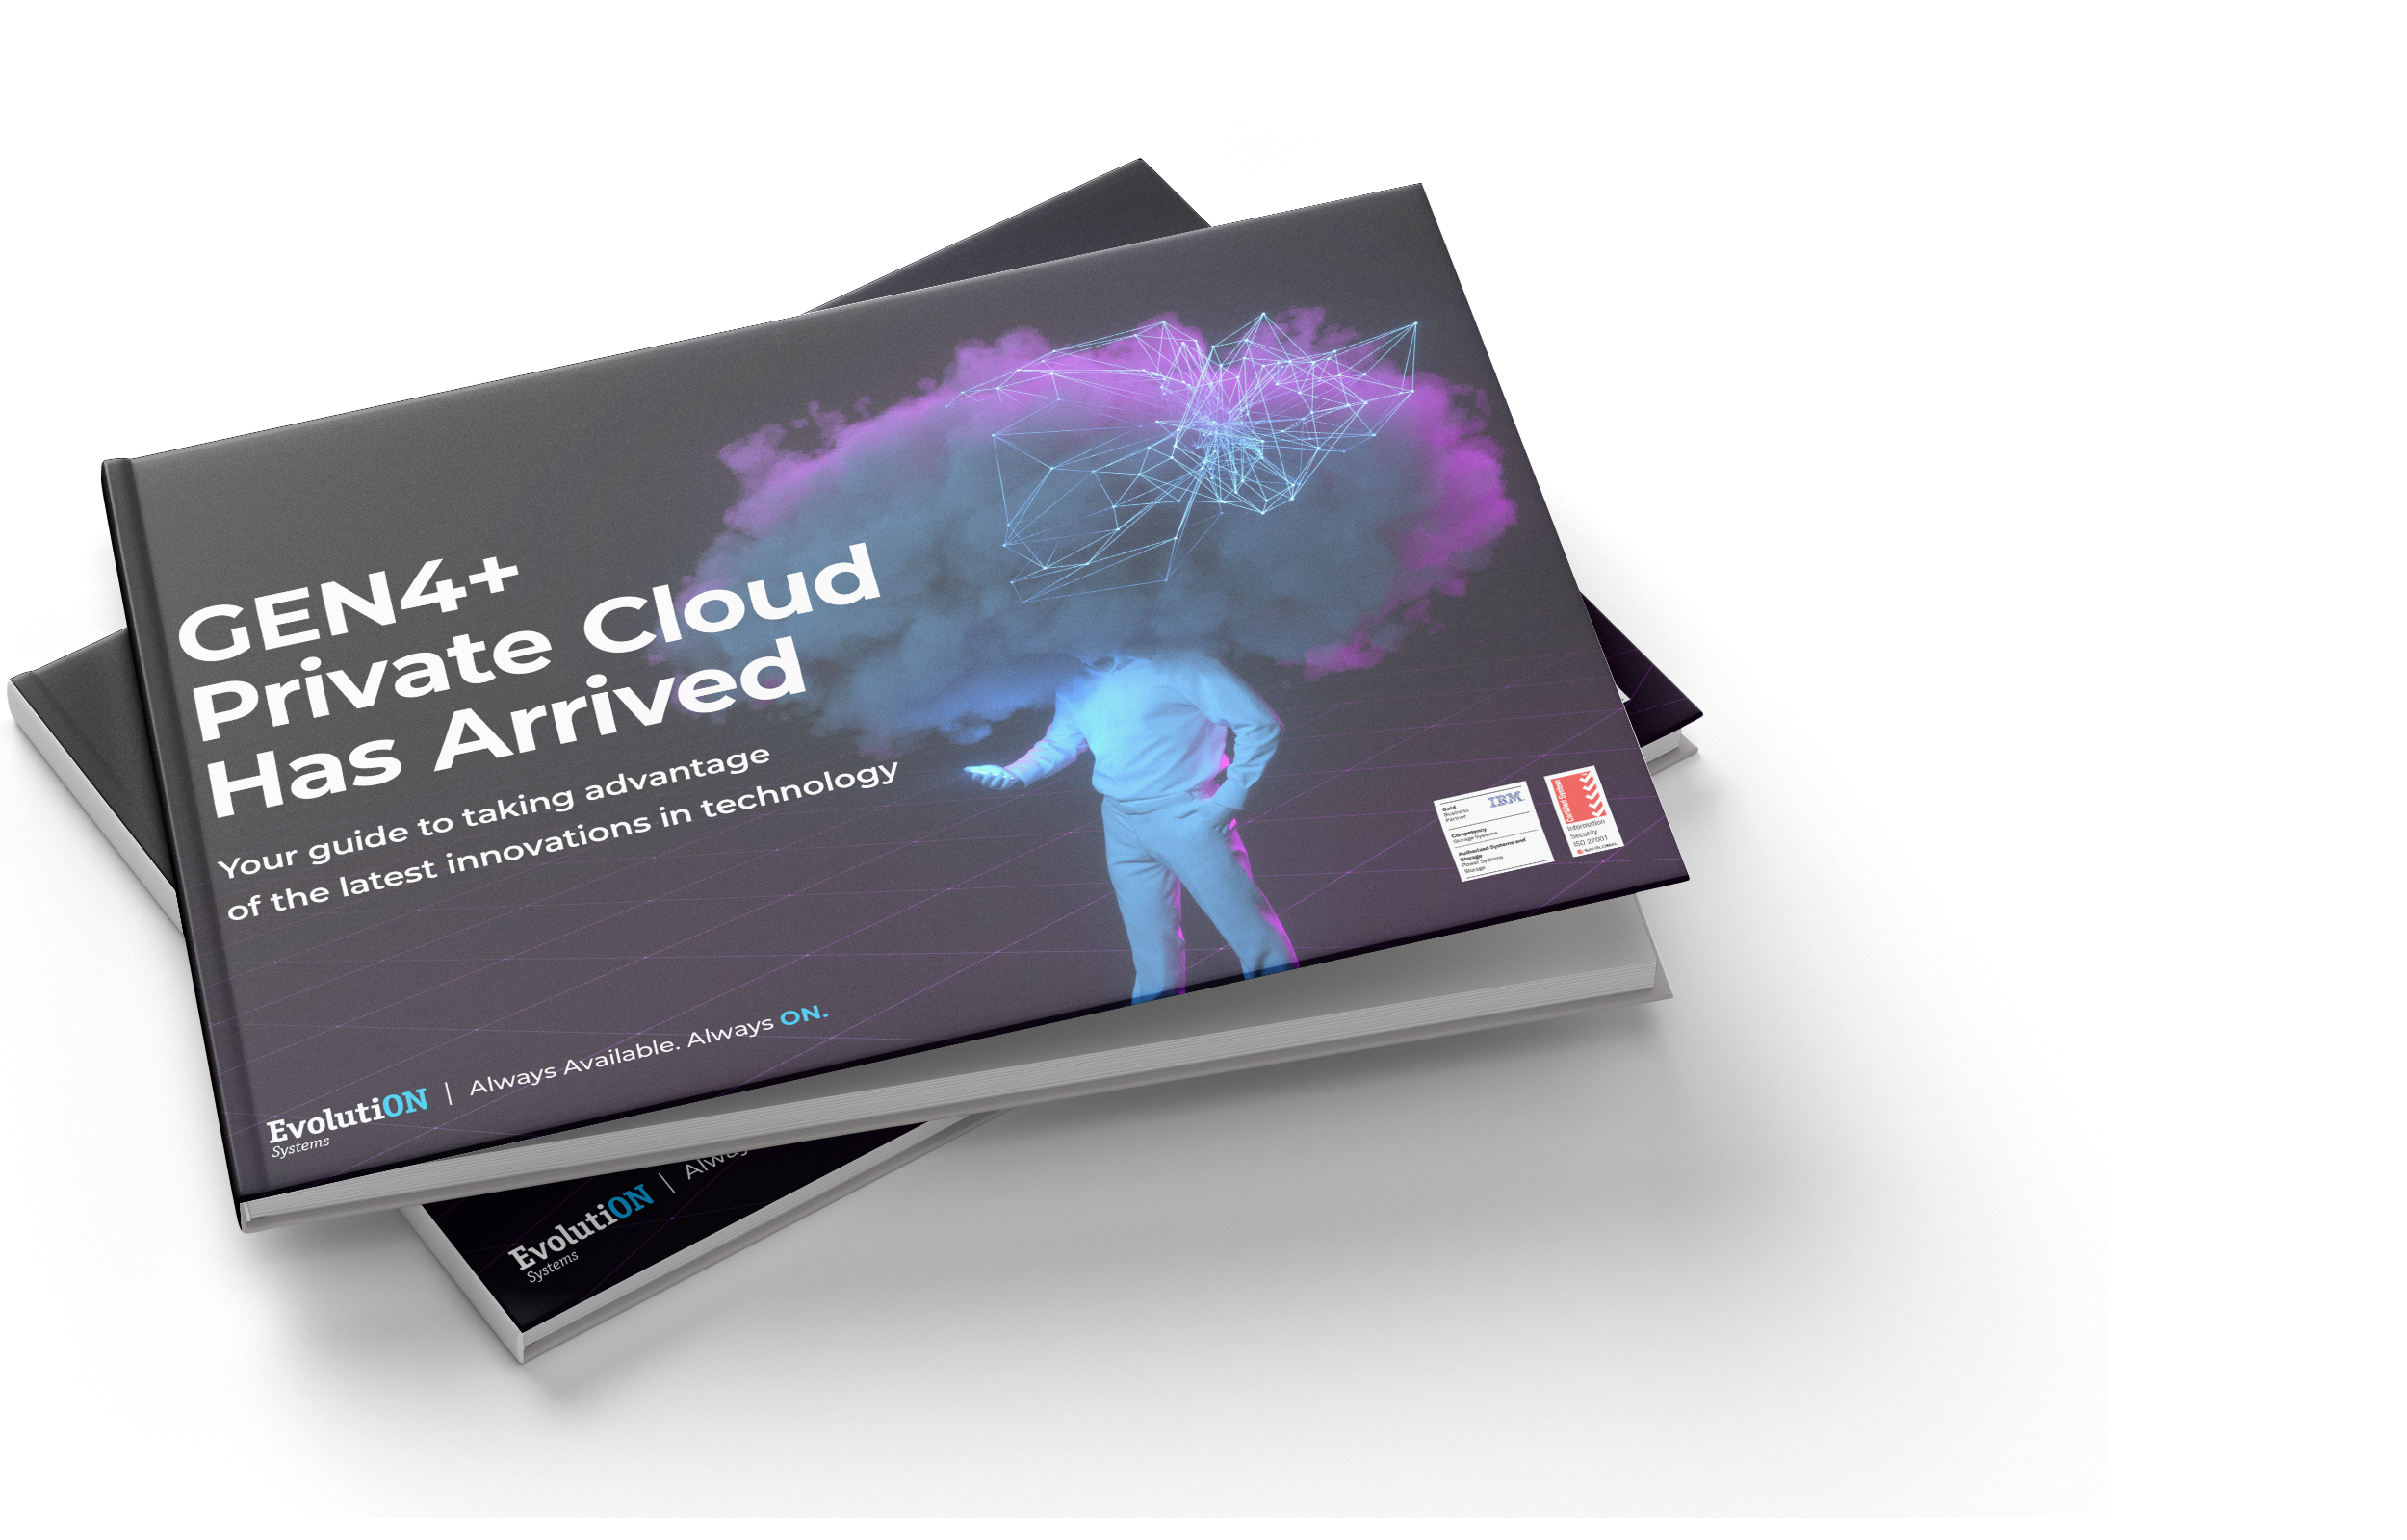 Your Free Guide to GEN4+ Private Cloud